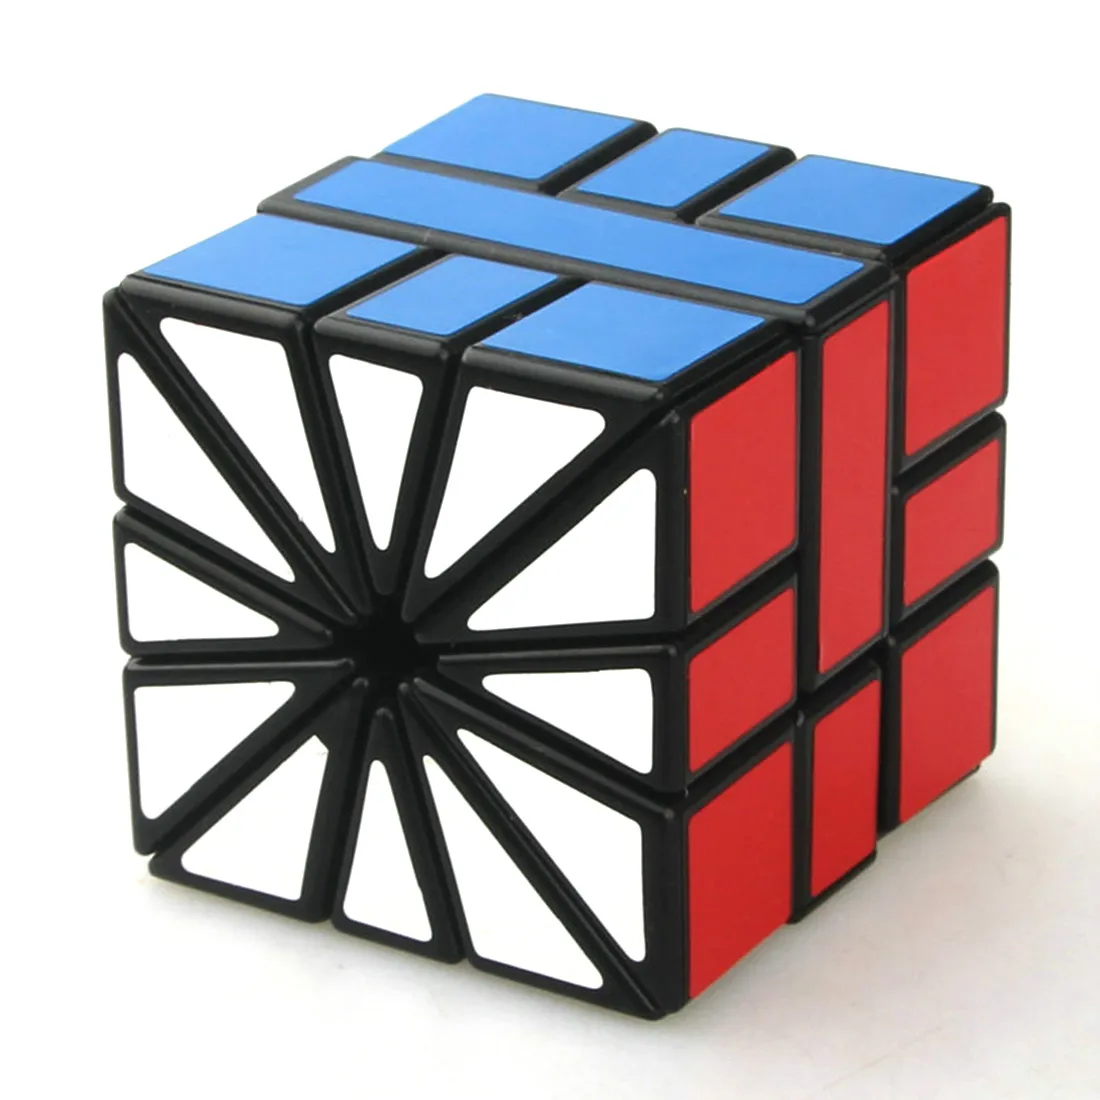 

CubeTwist Strange Shape Cube Black White Square II SQ2 3x3x3 Speed Cube Sector Magic Cube Puzzle Toy Games and Puzzles